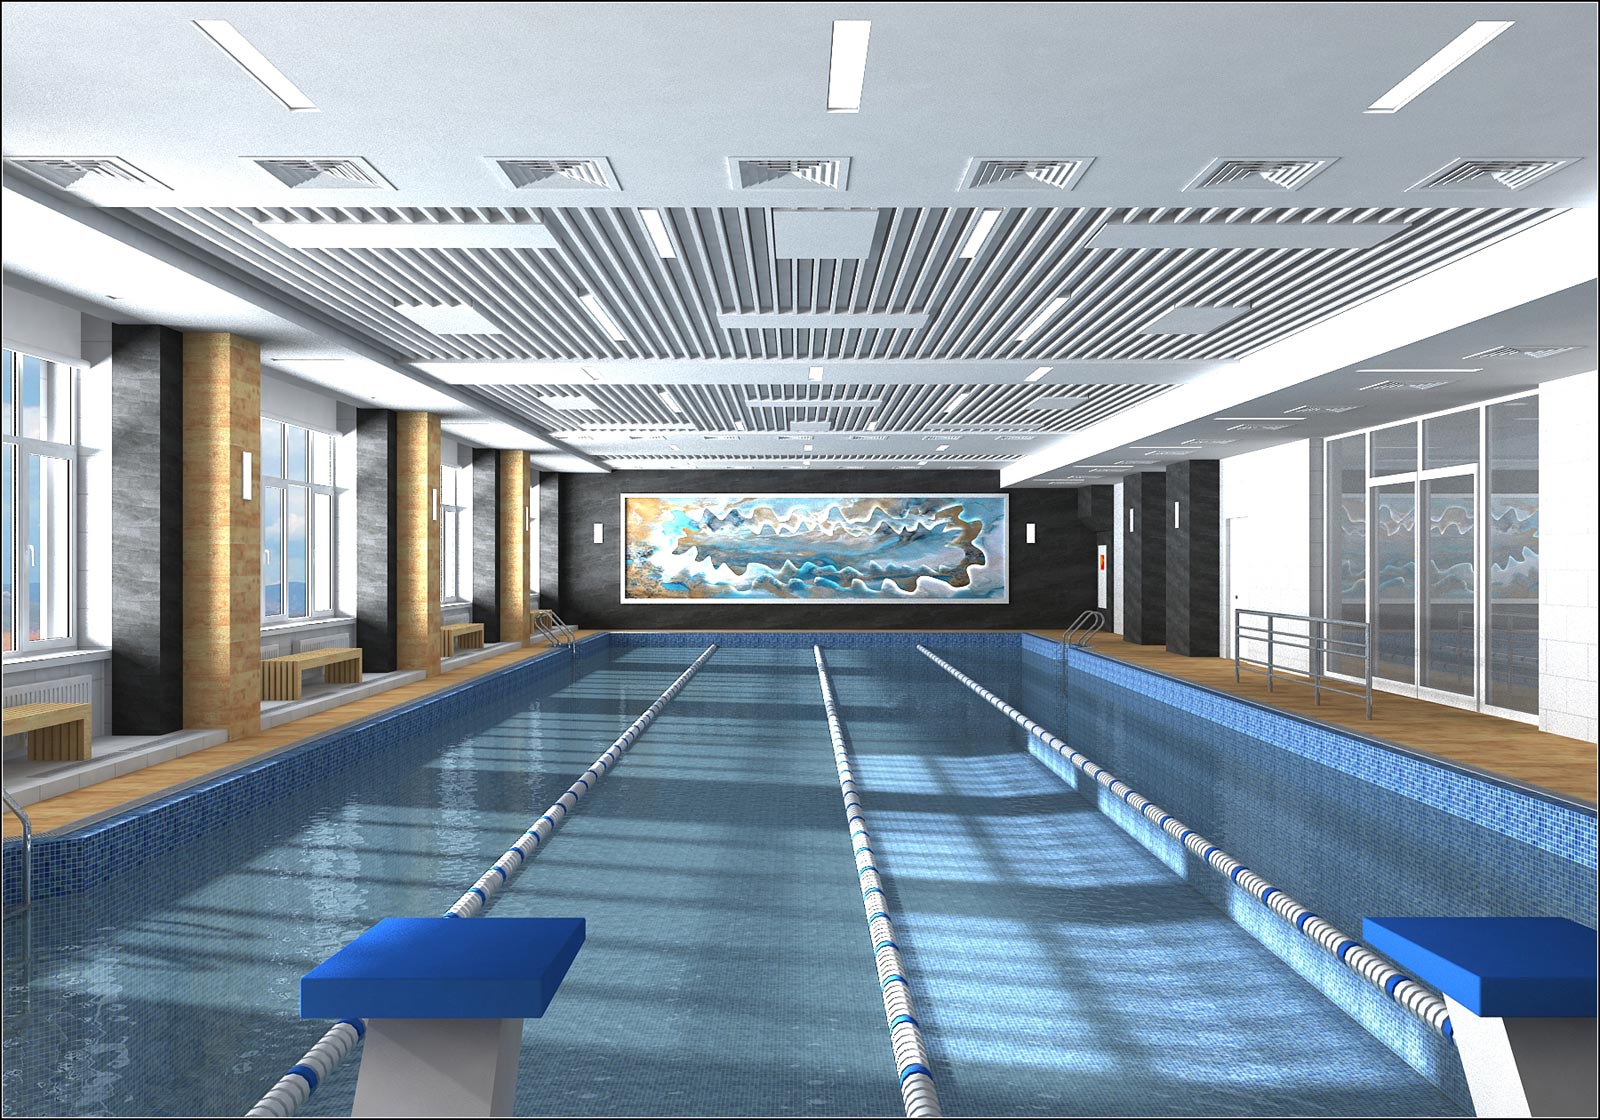 The project of interior design of the pool in Chernihiv in 3d max vray 1.5 image